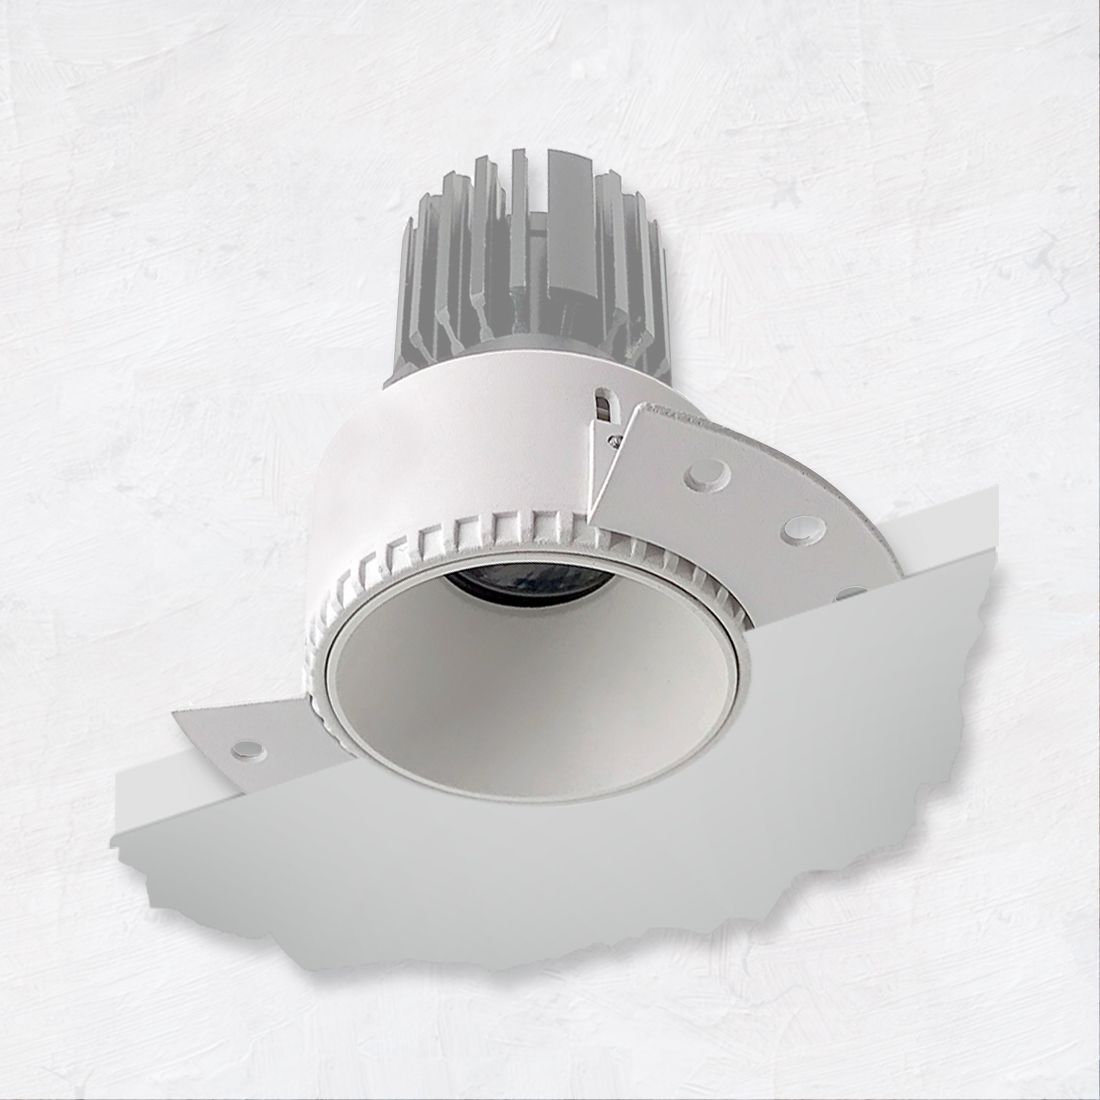 Alcon Lighting 14143 R Recessed, 3 Inch Recessed Lighting Led